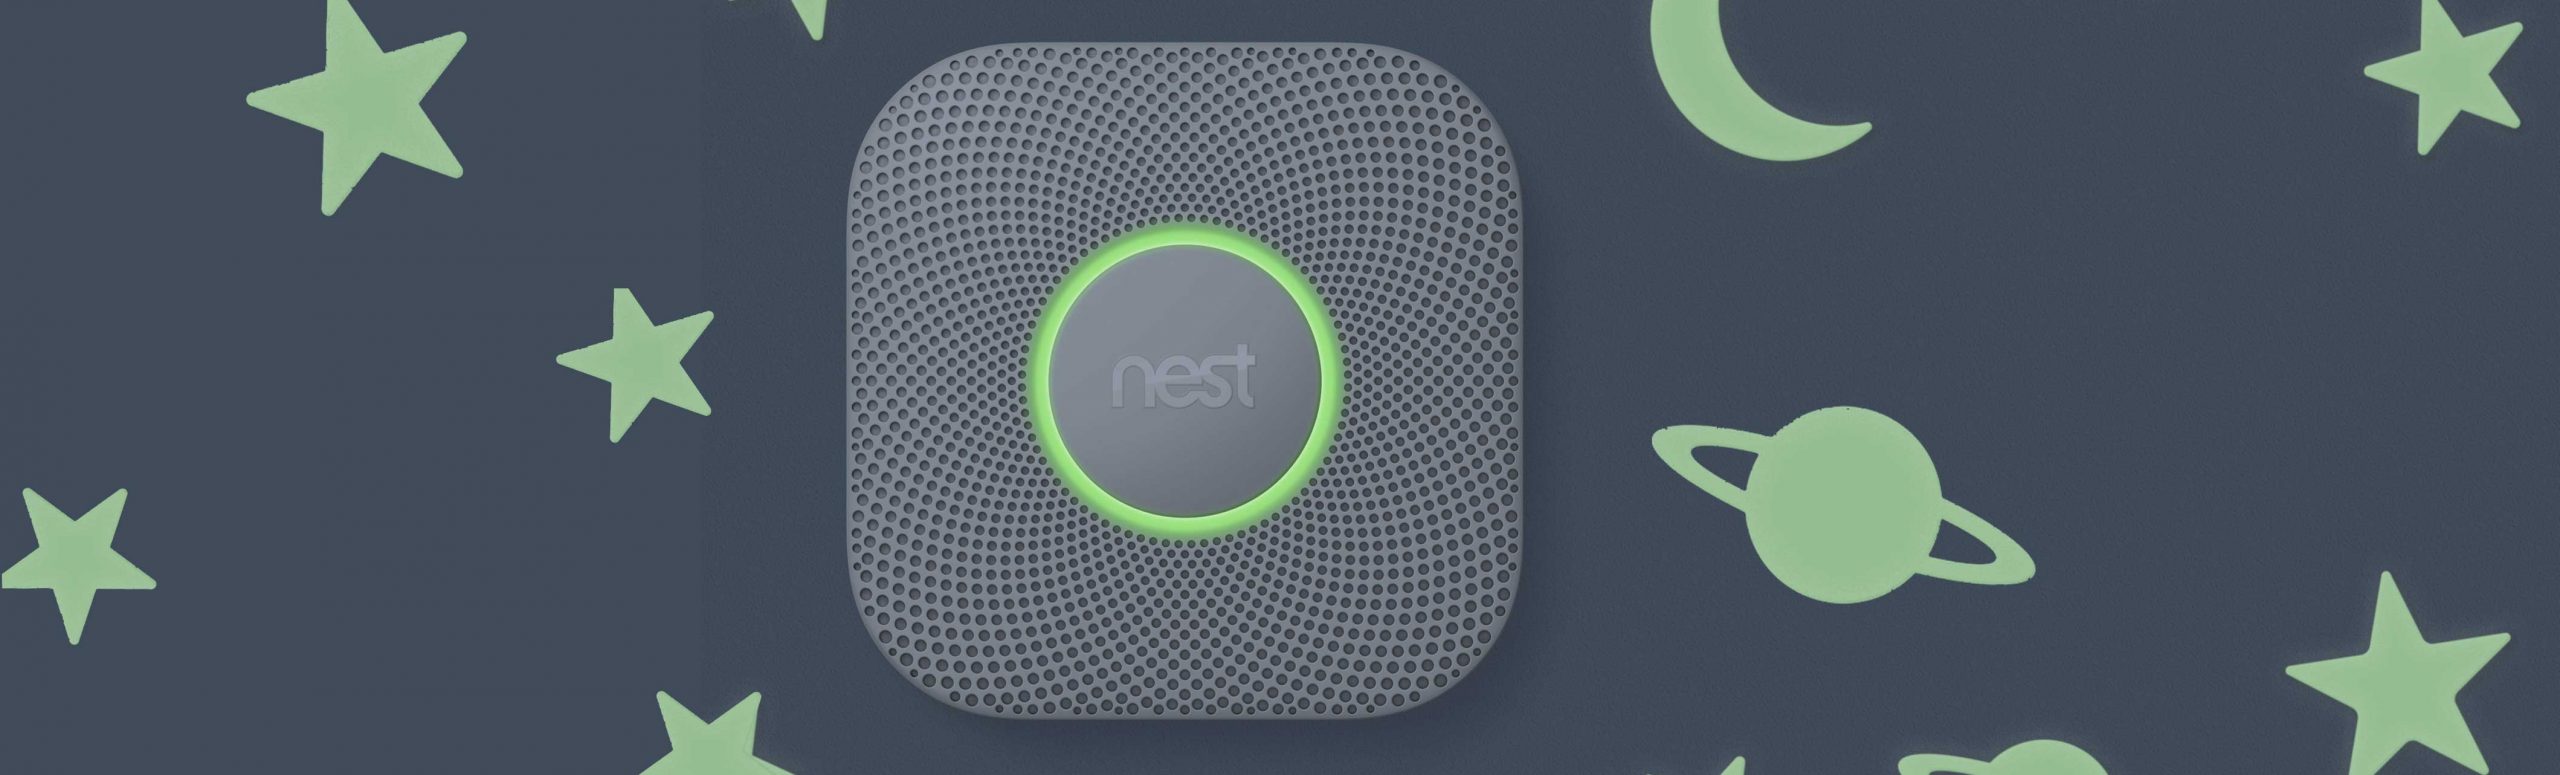 Google Nest Protect with stars, planets, and moons surrounding it